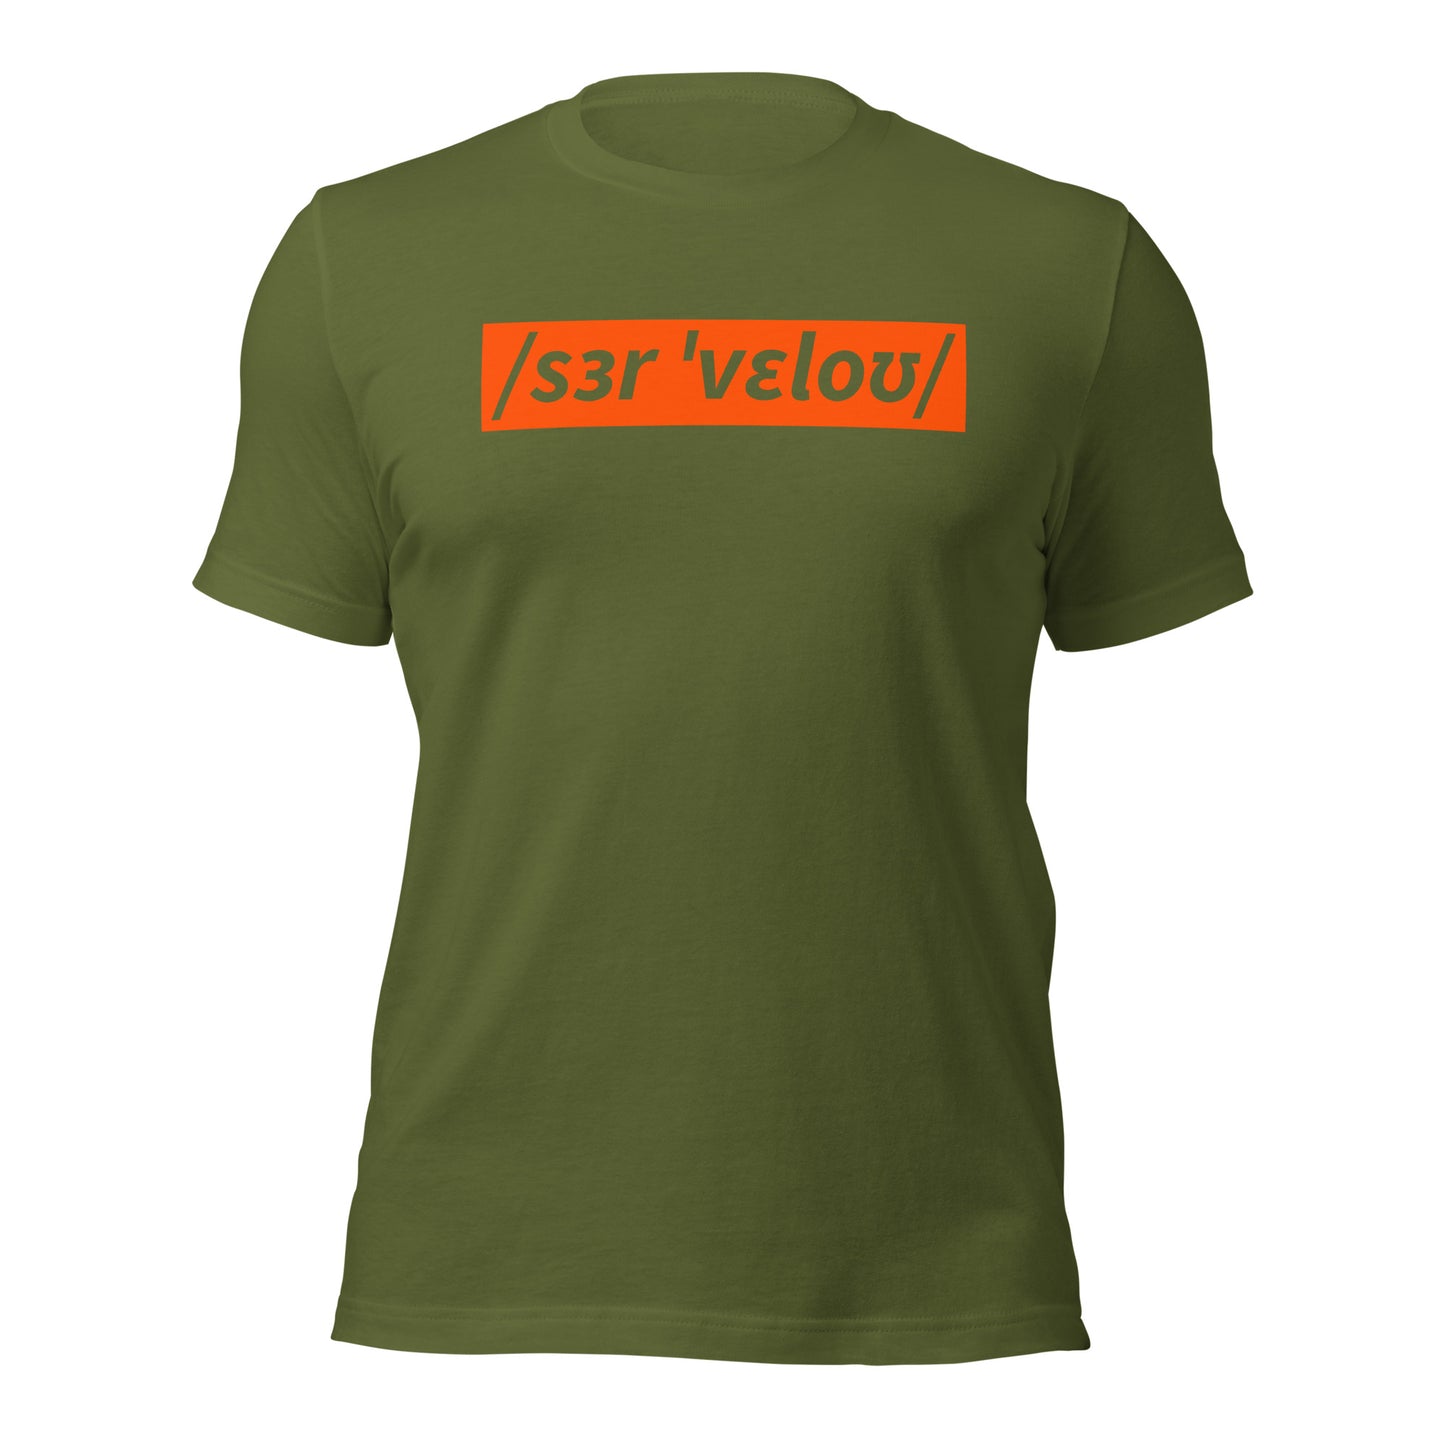 Sir Velo Bicycle T-Shirt, Adult, Phonetic Spelling AT001